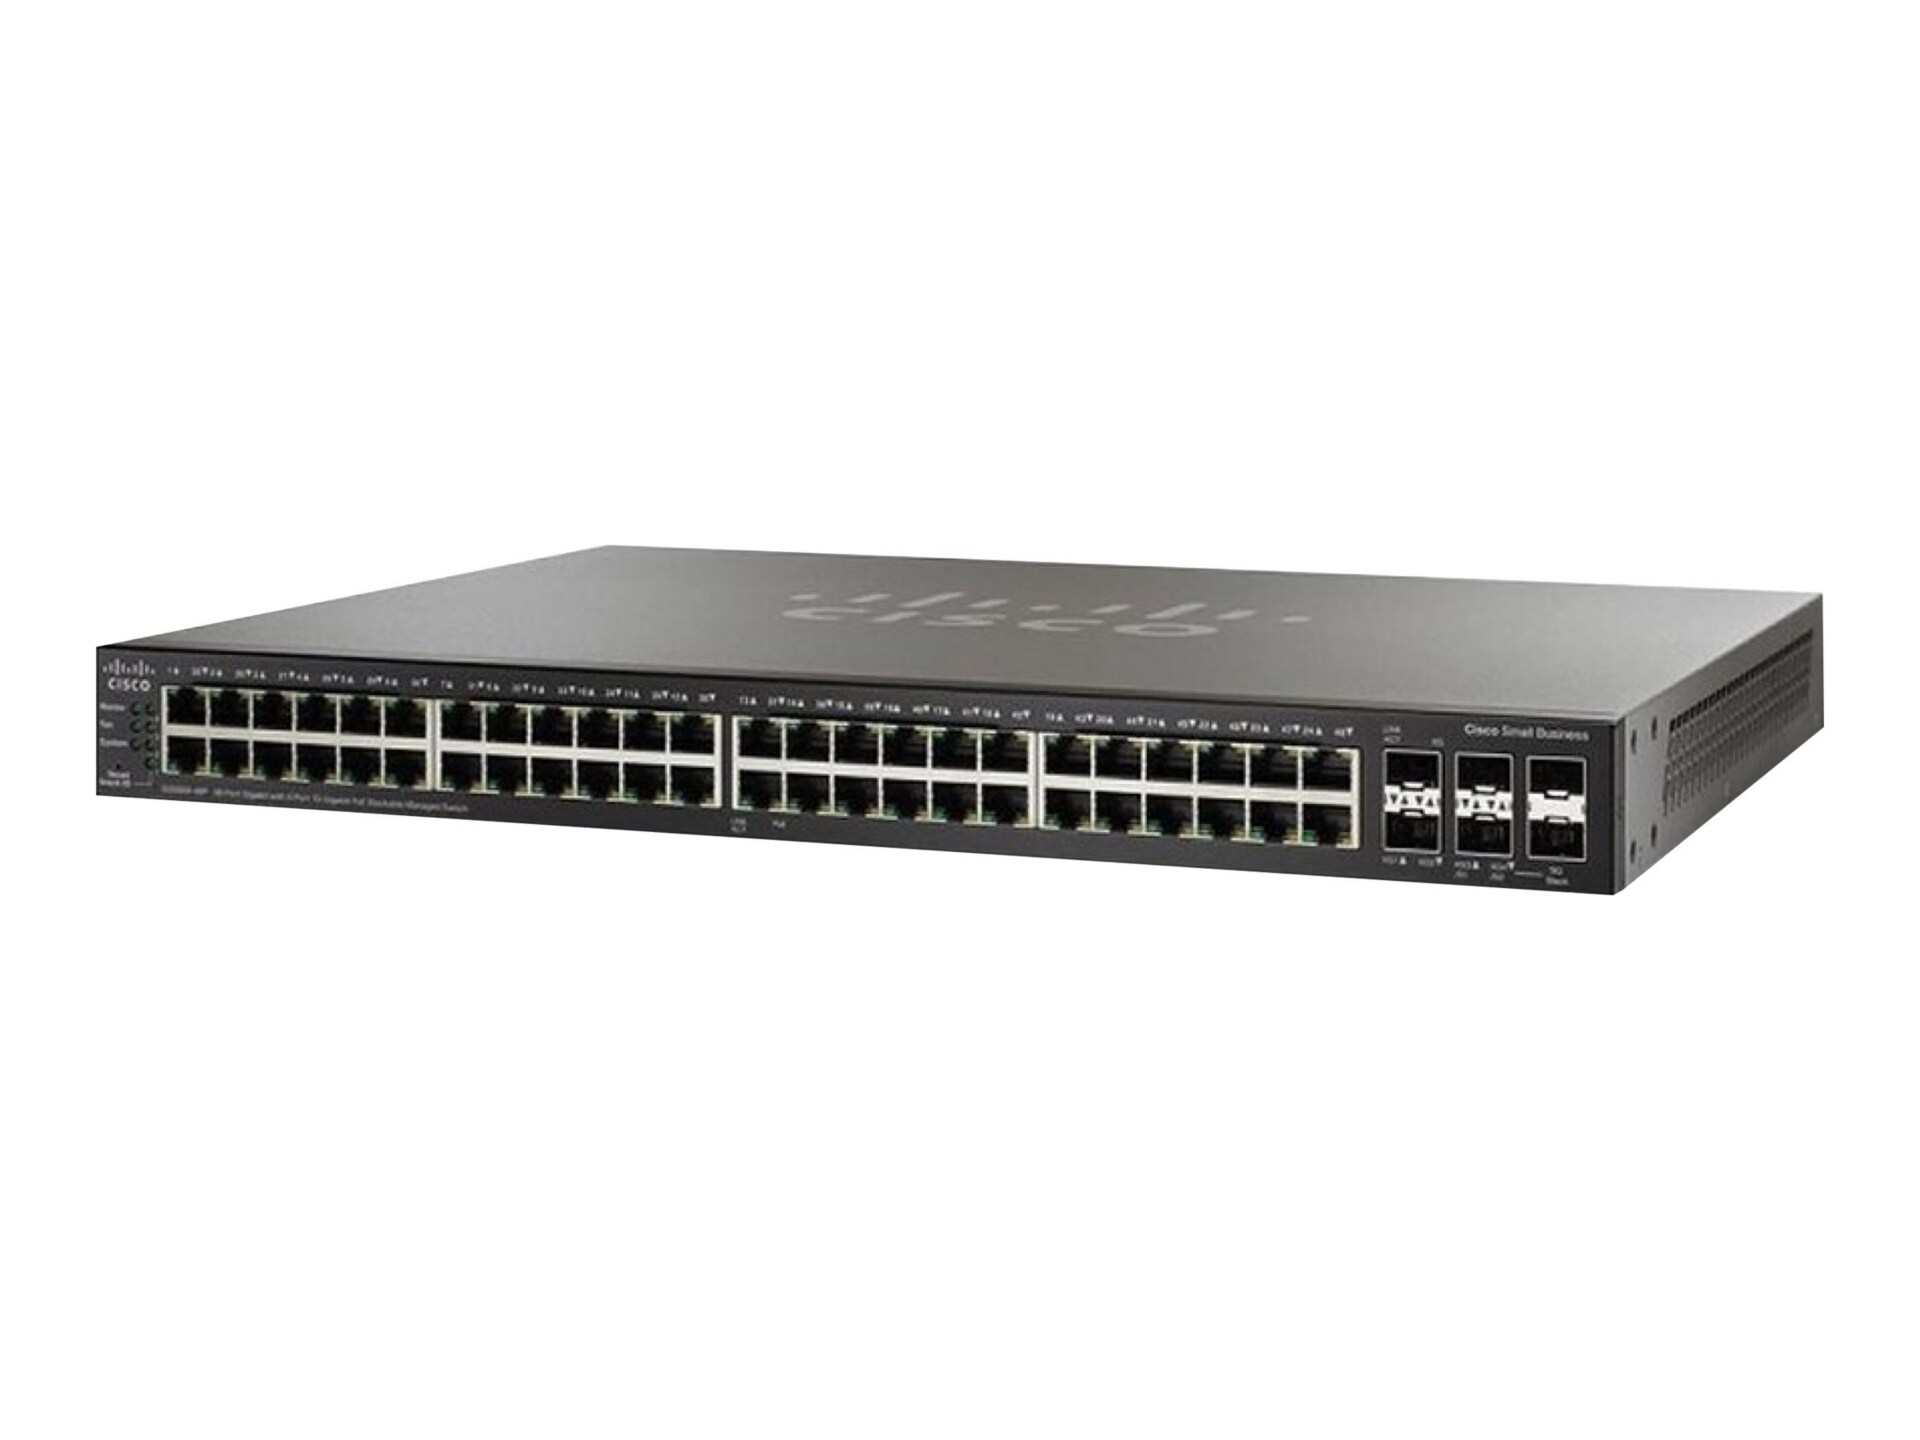 Cisco Small Business SG350X-48P - switch - 48 ports - managed - rack-mountable